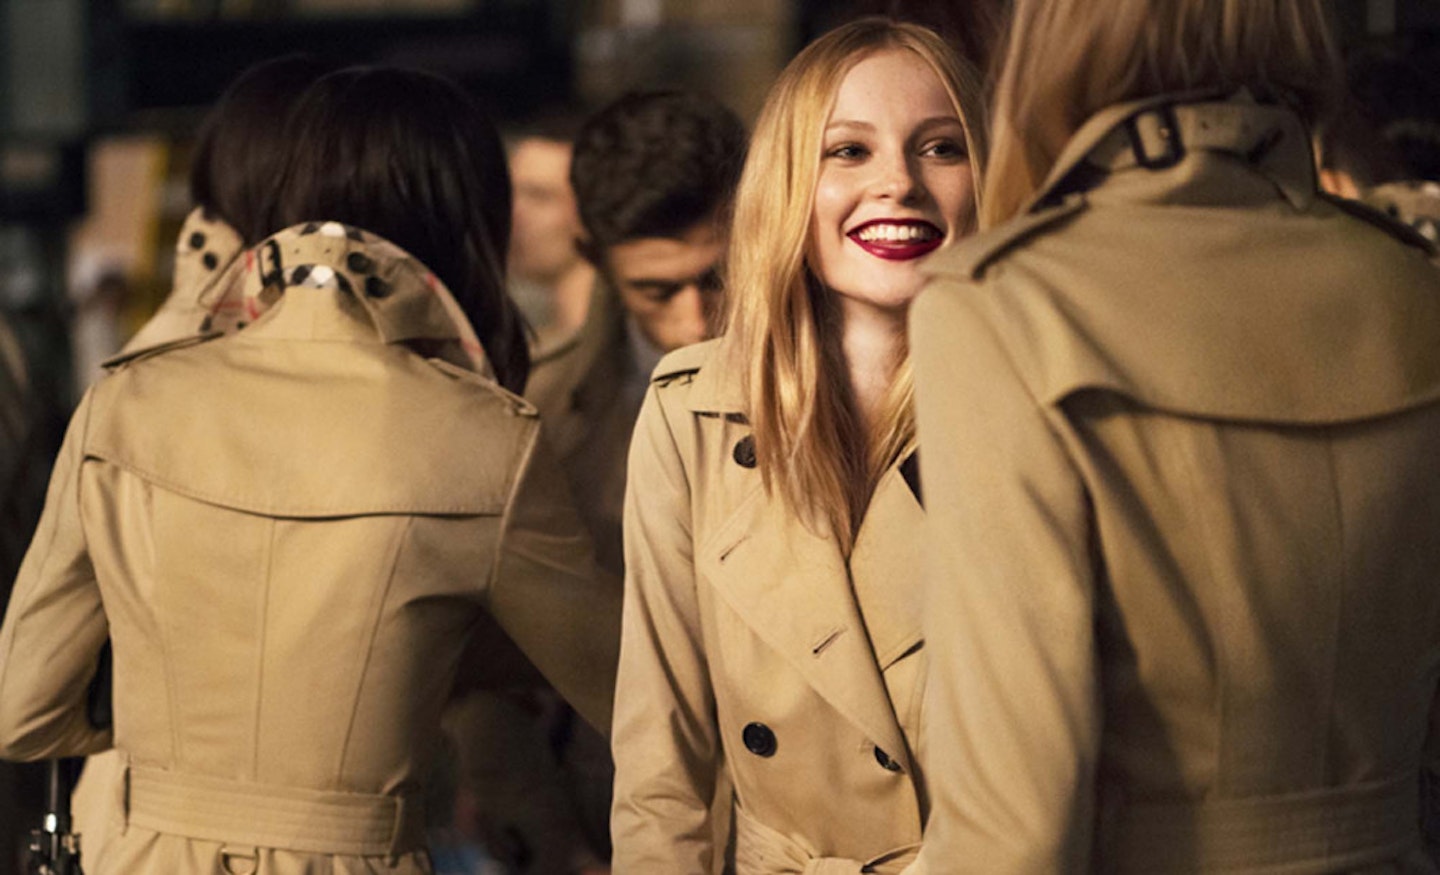 19._Burberry_Festive_Campaign_Stills__PRIVATE_AND_CONFIDENTIAL_-_ON_EMBARGO_9PM_UK_TIME_3_NOVEMBER_